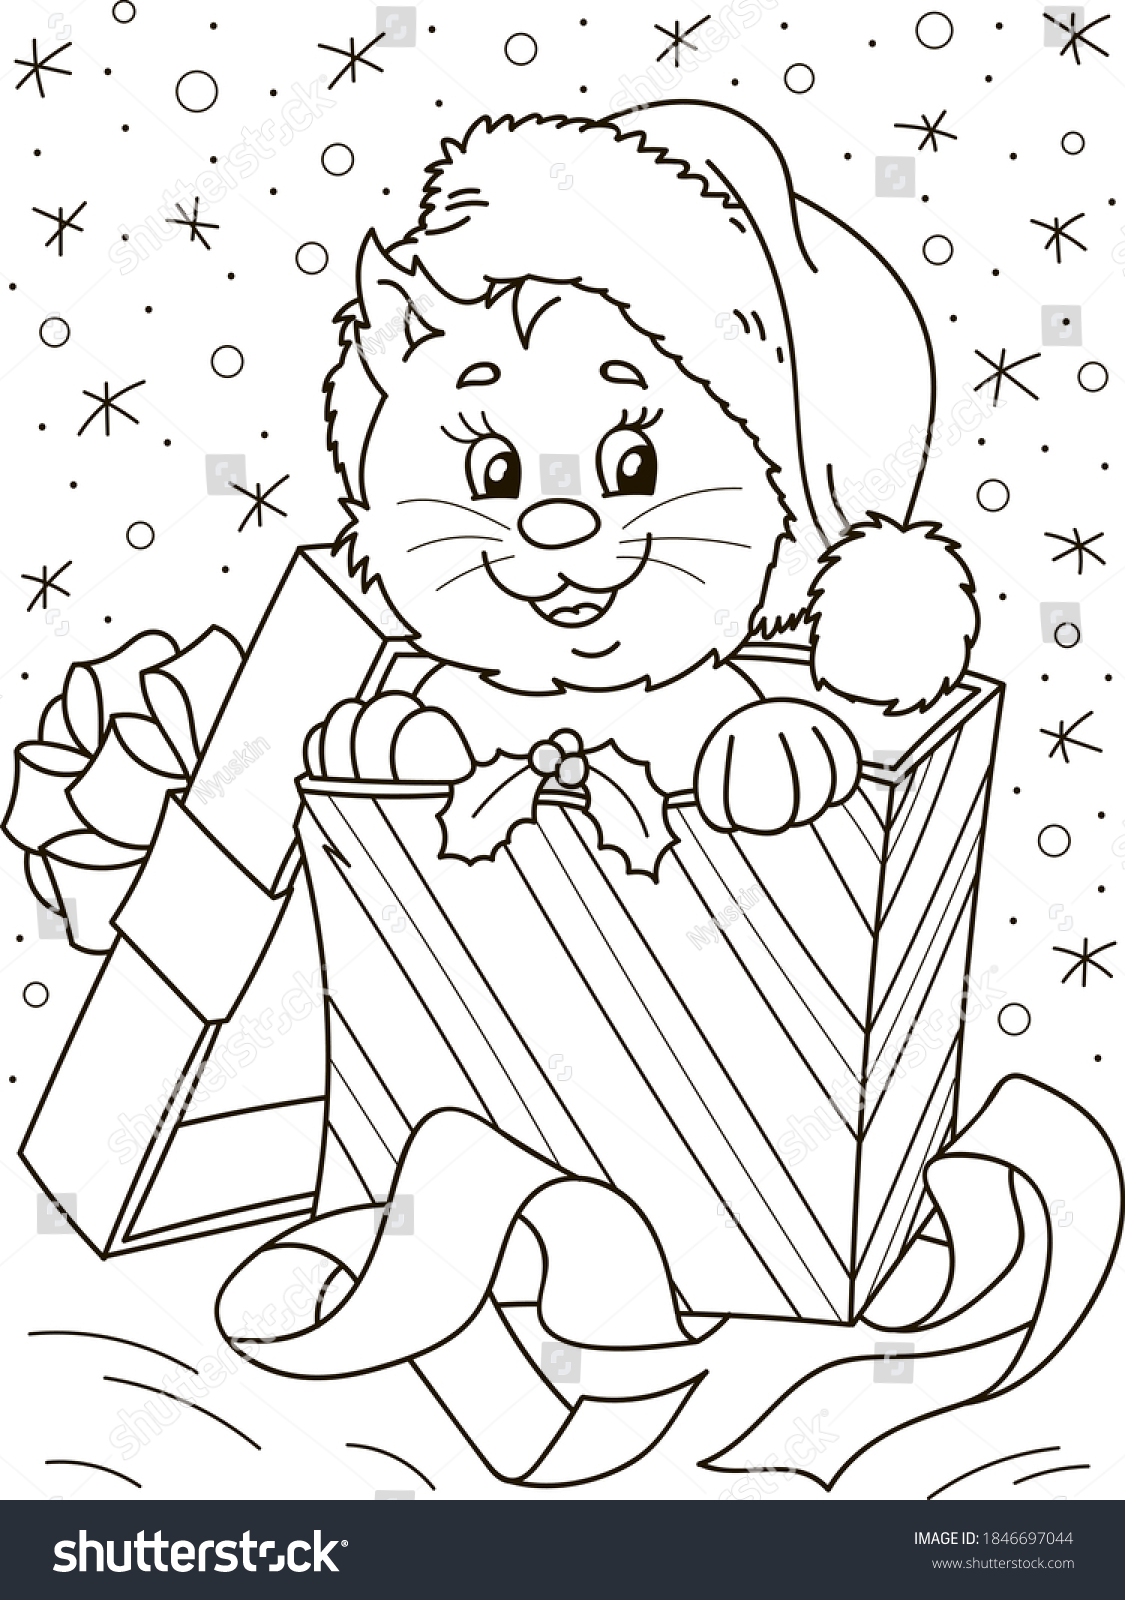 Coloring page outline of cartoon smiling cute cat with Christmas gift. Colorful vector illustration, winters coloring book for kids. #1846697044